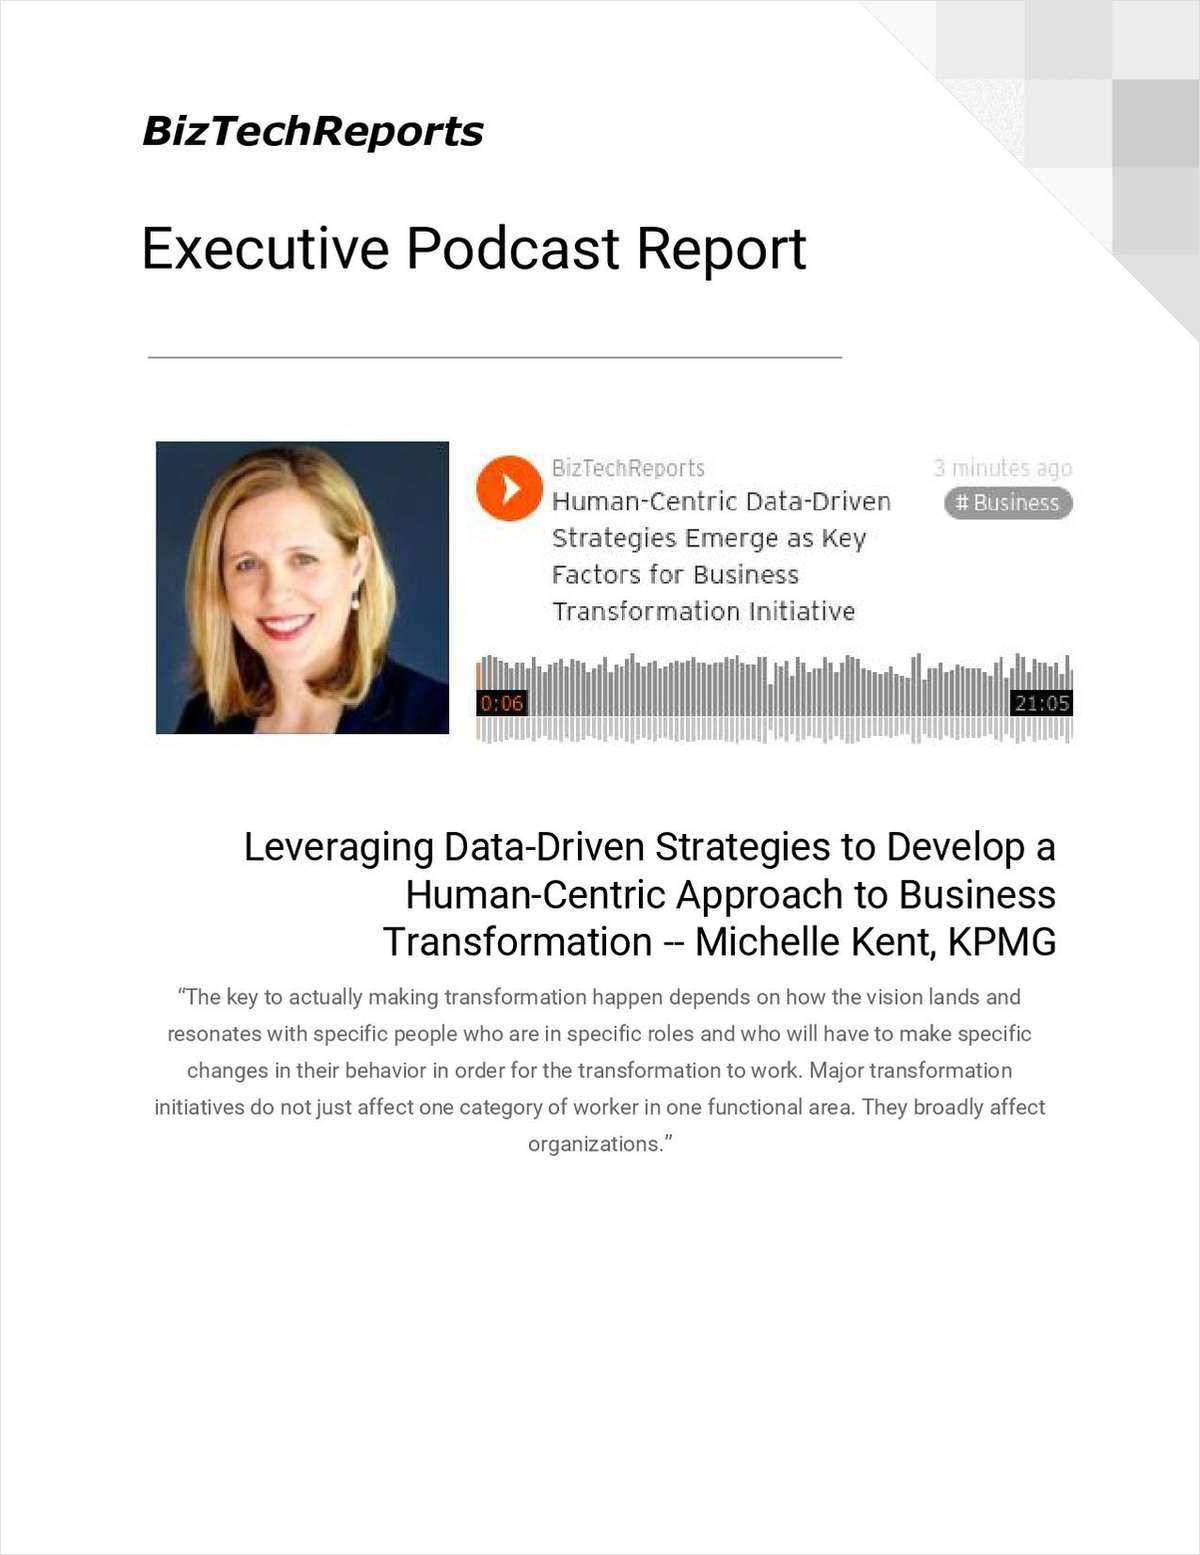 Leveraging Data-Driven Strategies to Develop a Human-Centric Approach to Business Transformation -- Michelle Kent, KPMG